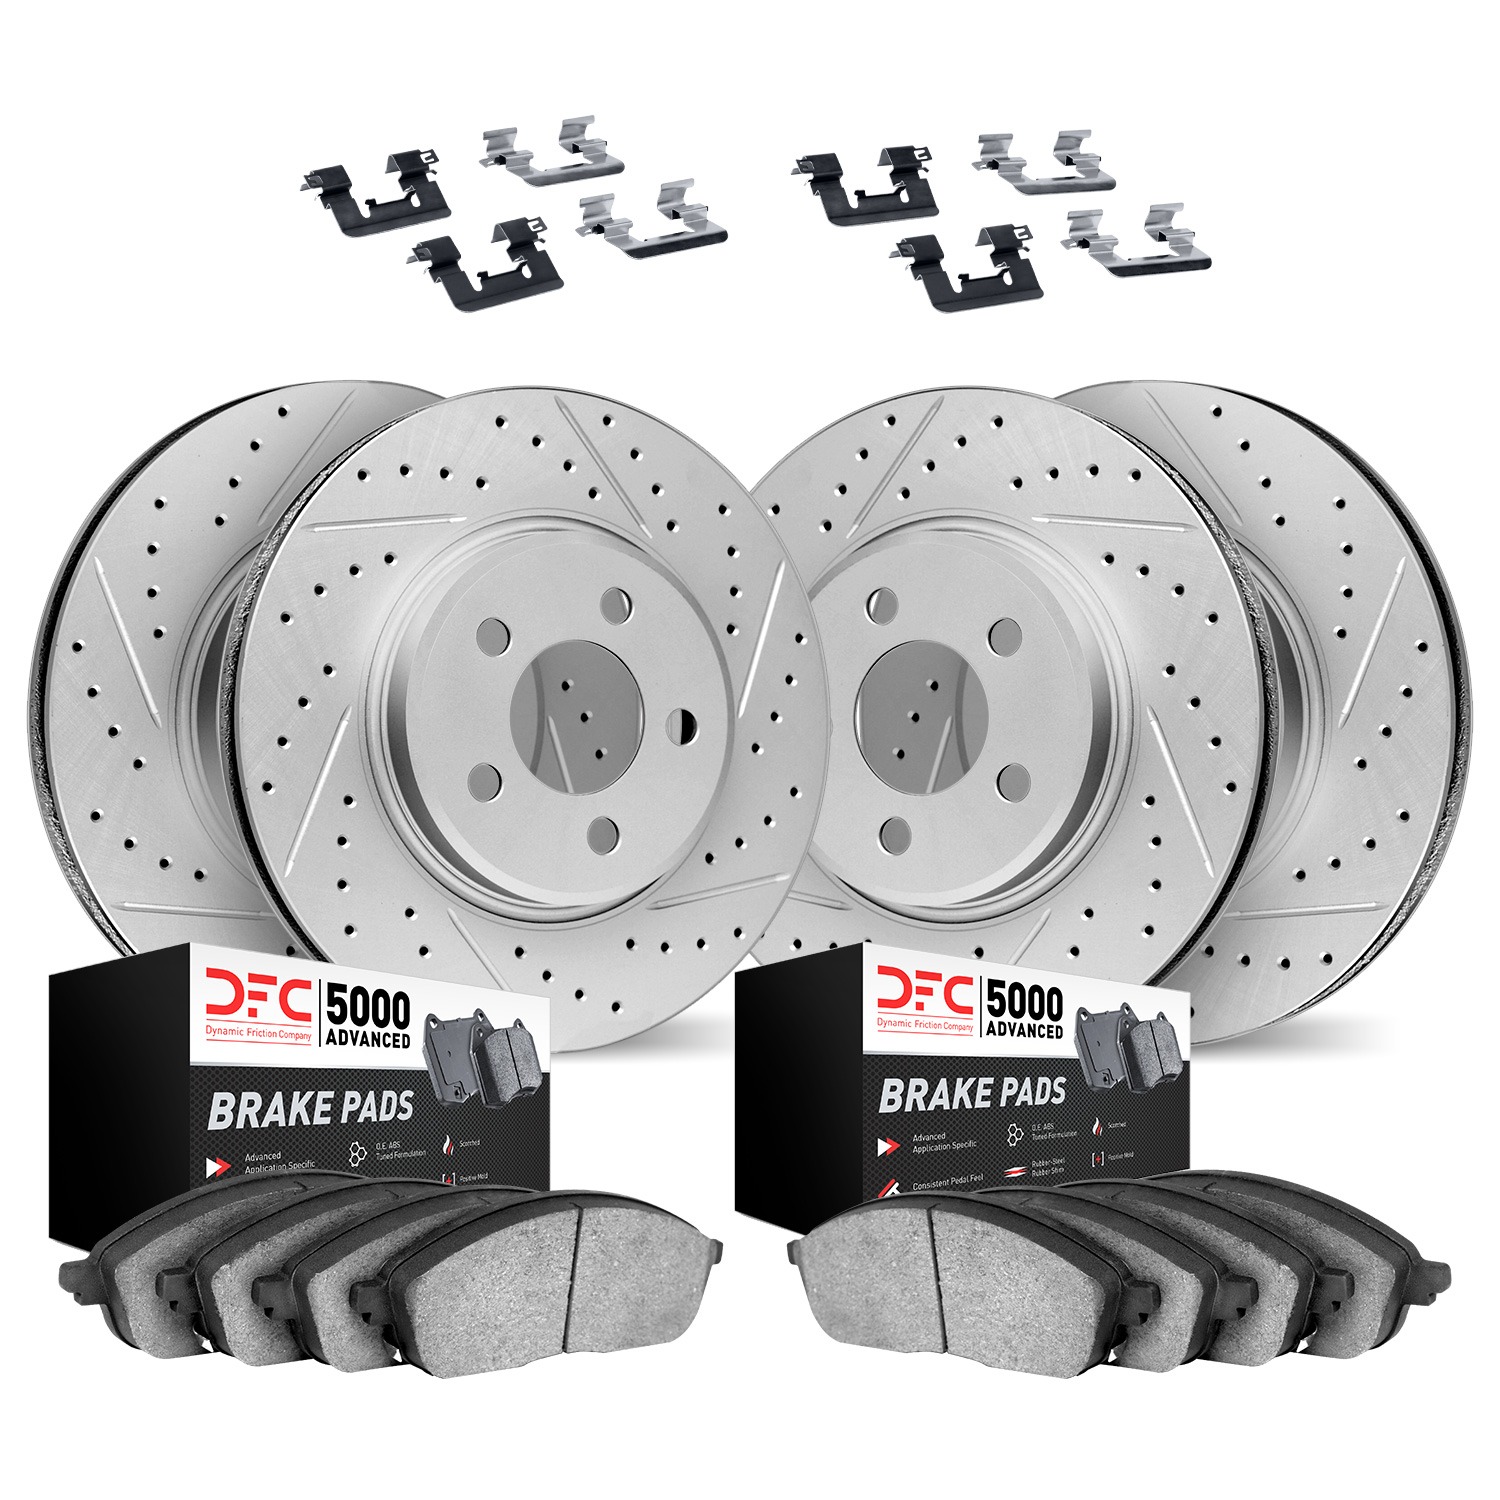 2514-27004 Geoperformance Drilled/Slotted Rotors w/5000 Advanced Brake Pads Kit & Hardware, 2004-2007 Volvo, Position: Front and